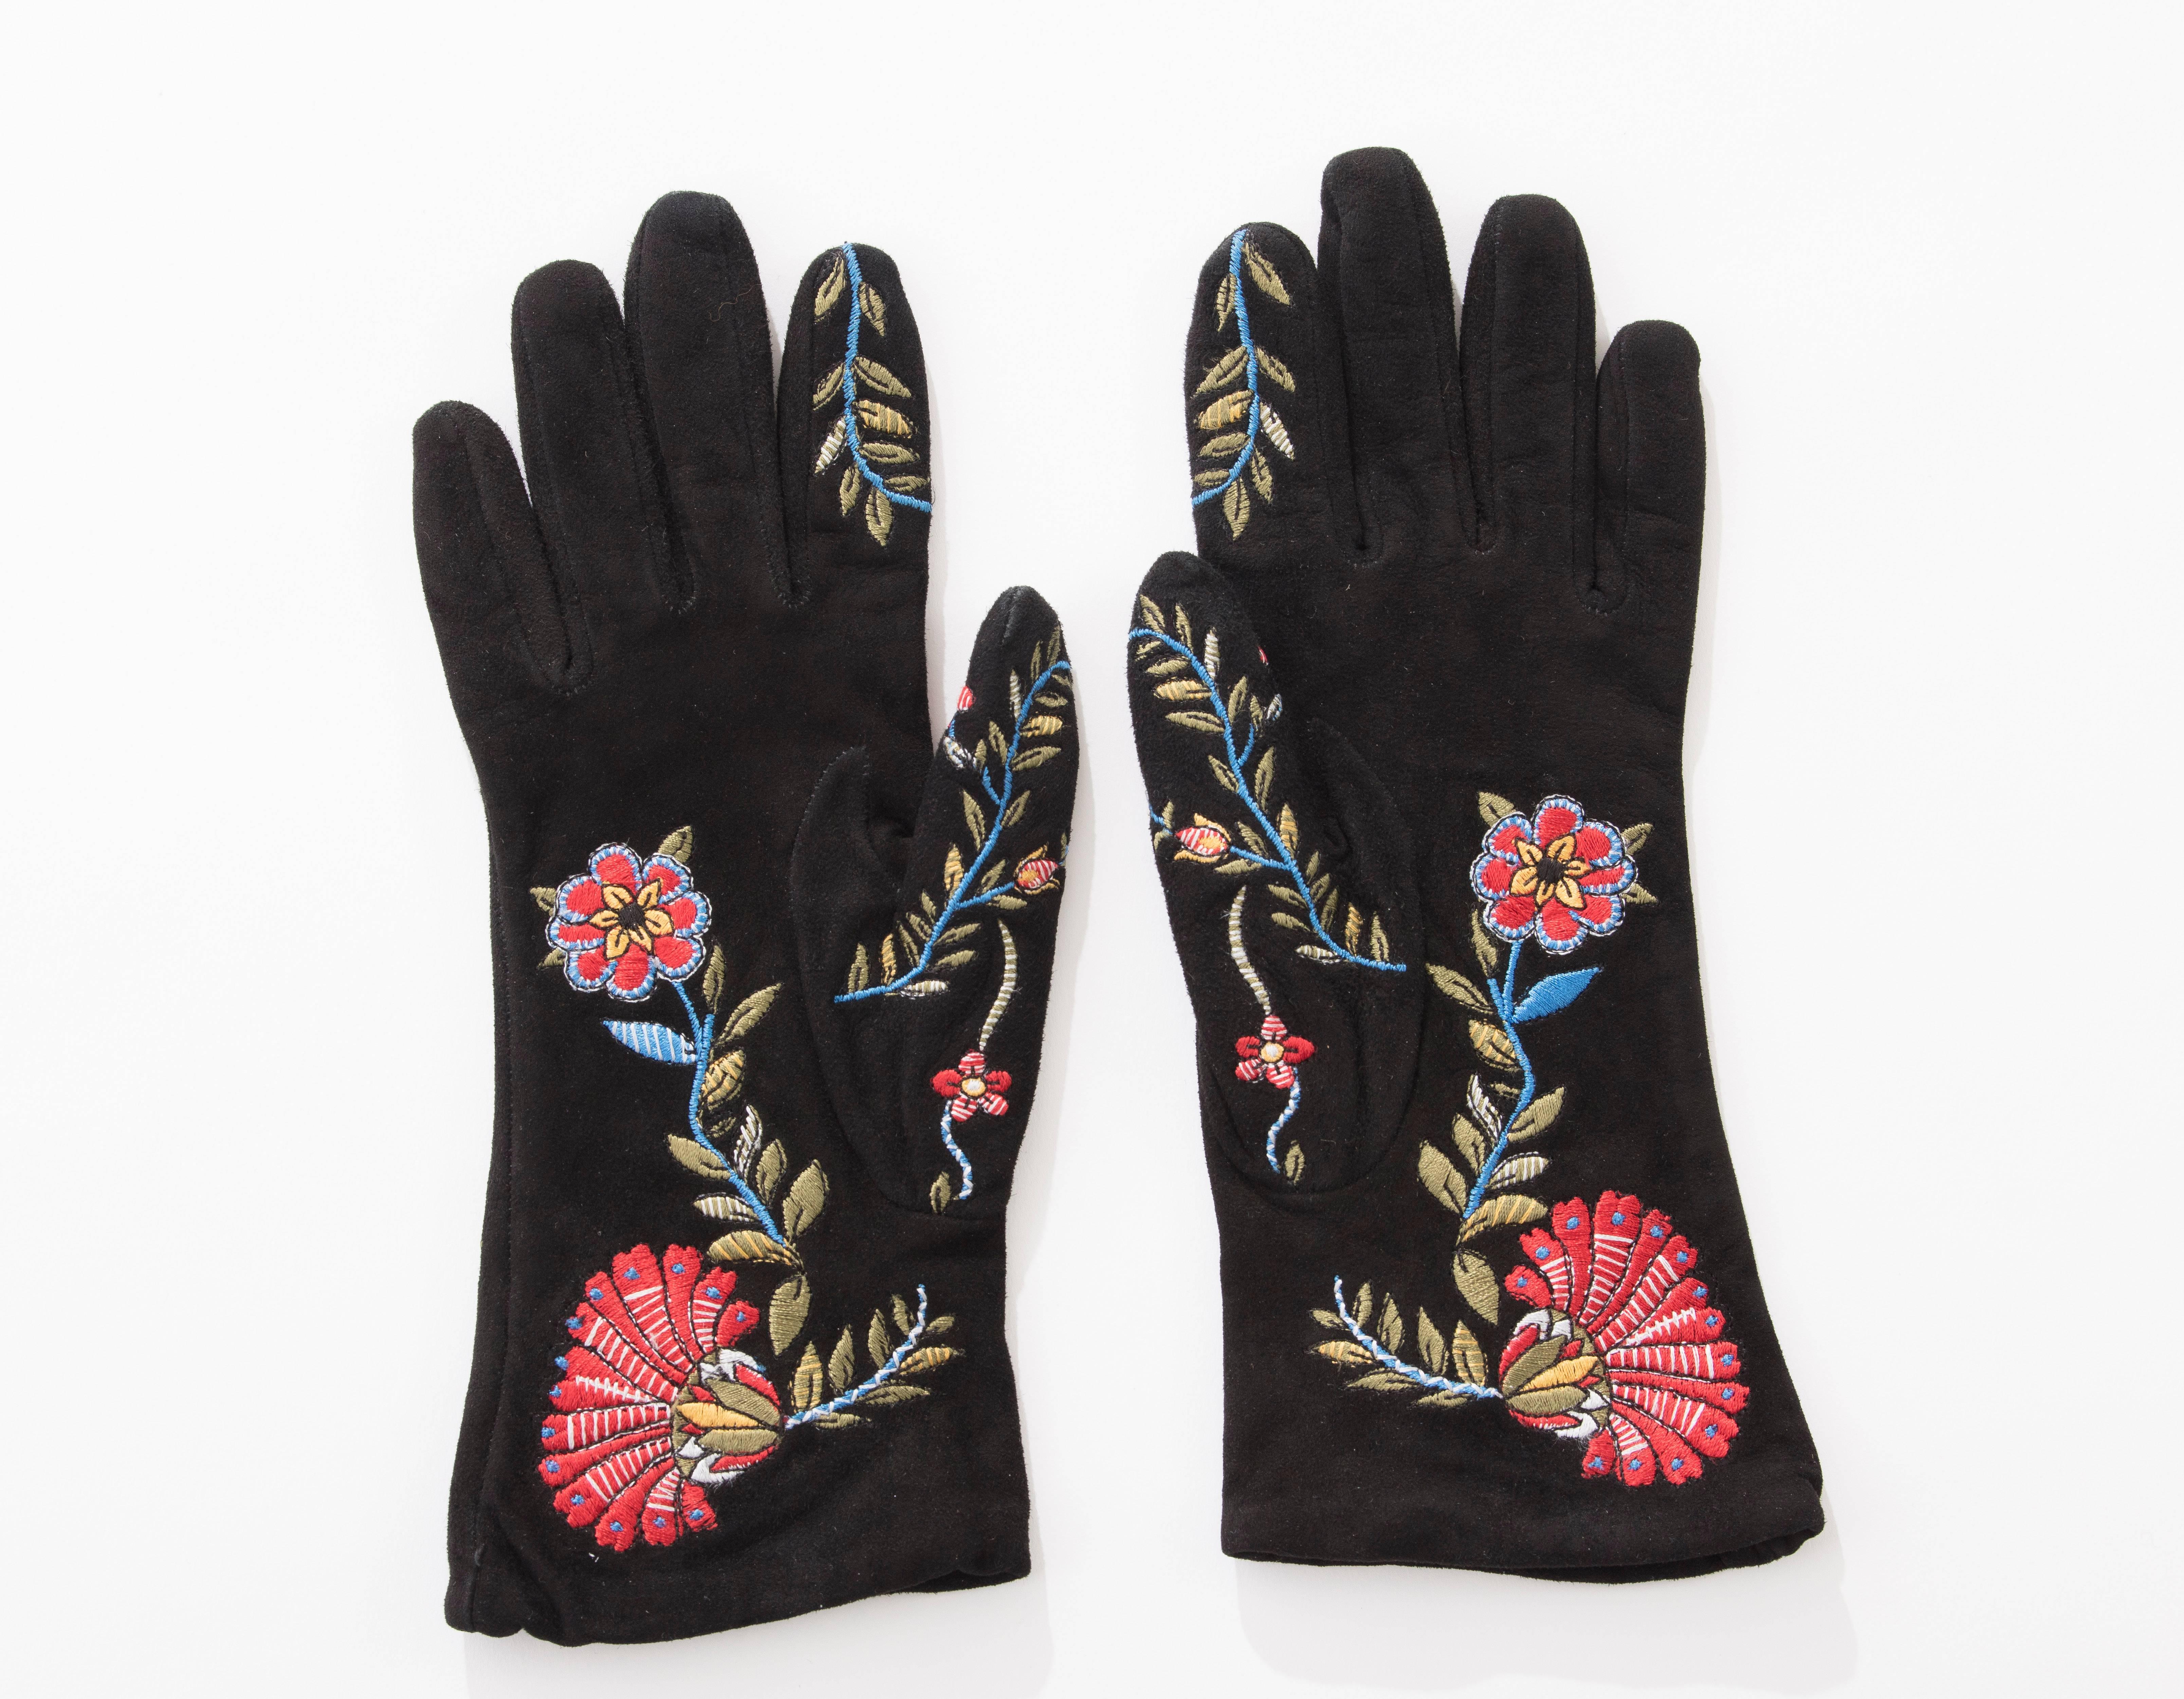 John Galliano for Christian Dior black suede gloves with polychrome floral embroidery, tonal stitching and fully lined in silk.

Length: 9.25, Width 3.25
